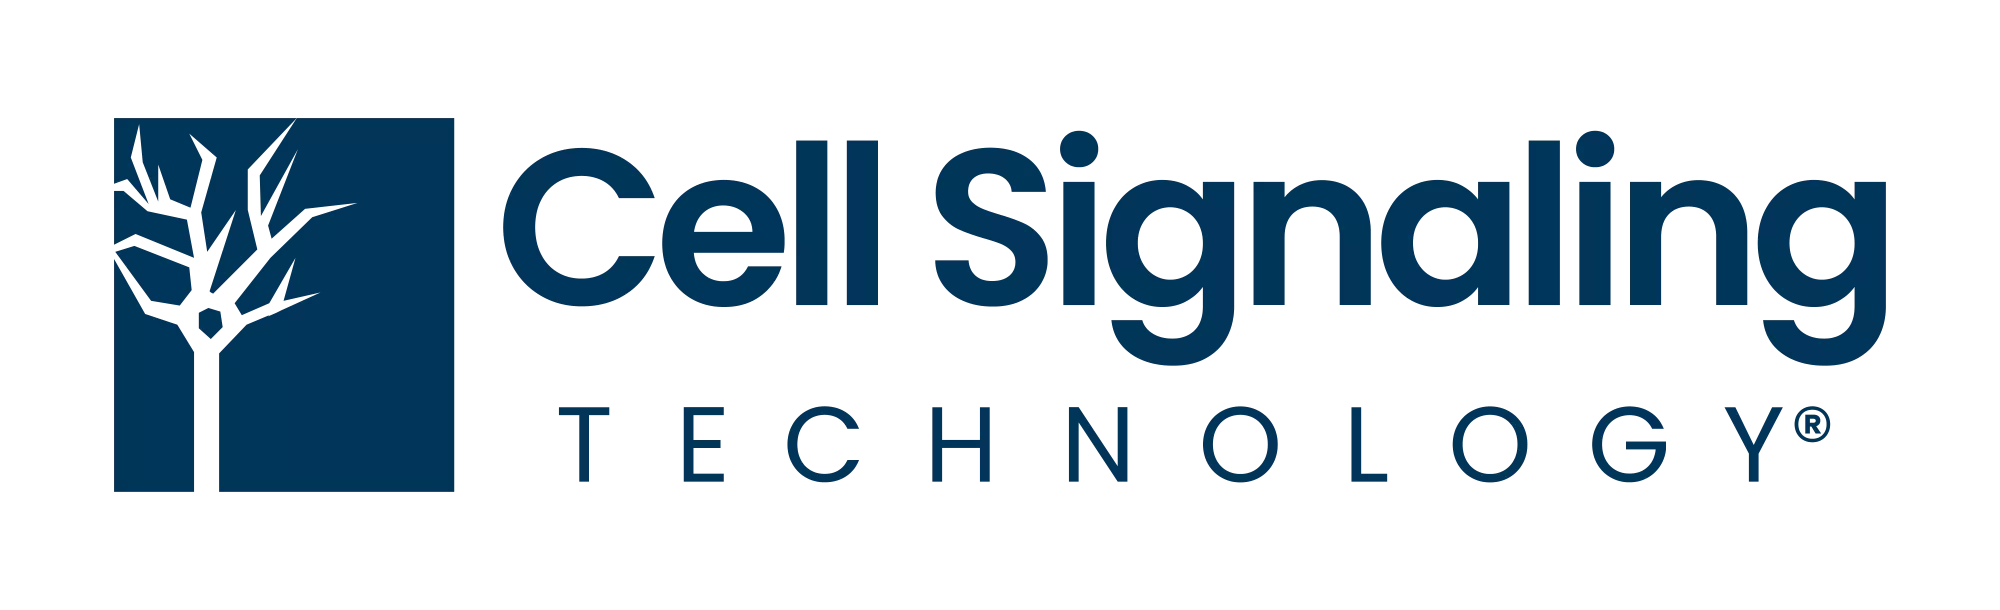 Cell Signaling Technology logo